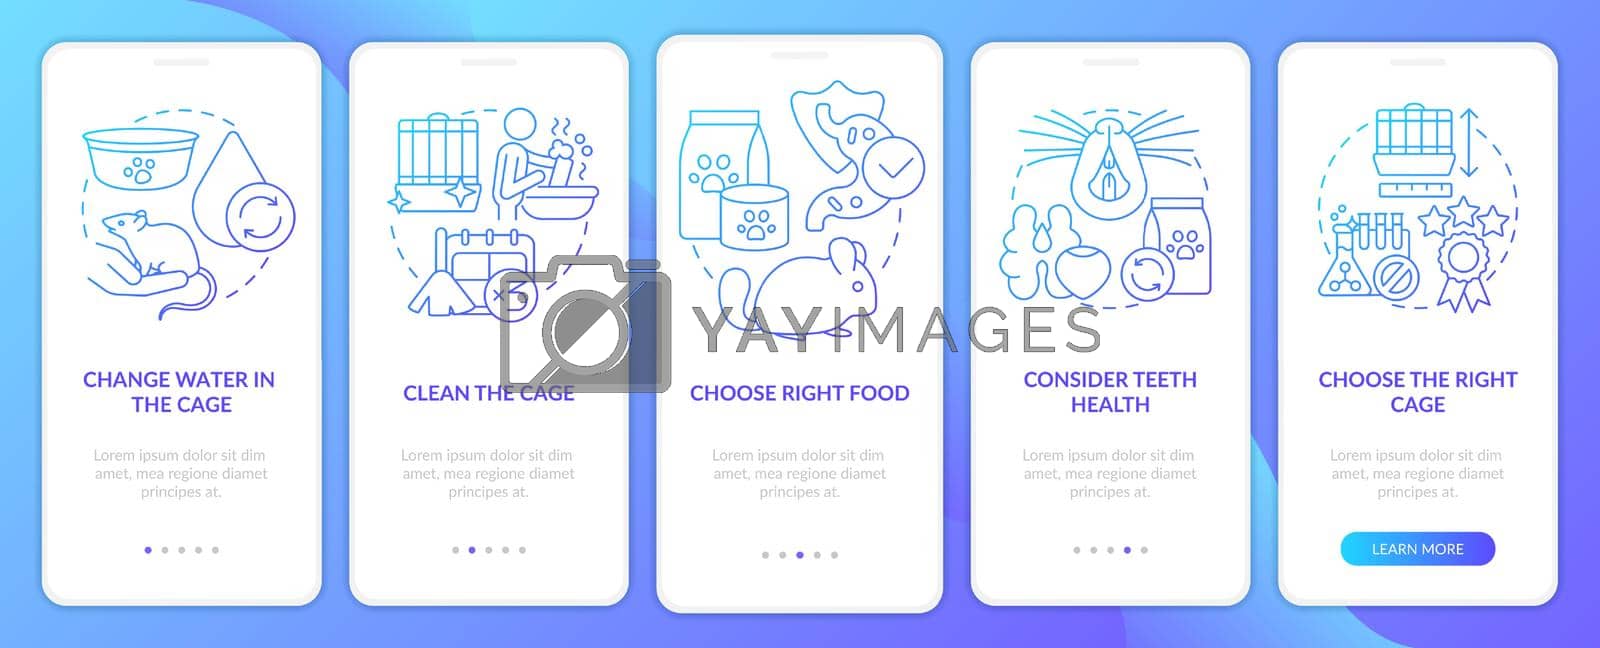 Keeping small animals healthy blue gradient onboarding mobile app screen. Walkthrough 5 steps graphic instructions pages with linear concepts. UI, UX, GUI template. Myriad Pro-Bold, Regular fonts used